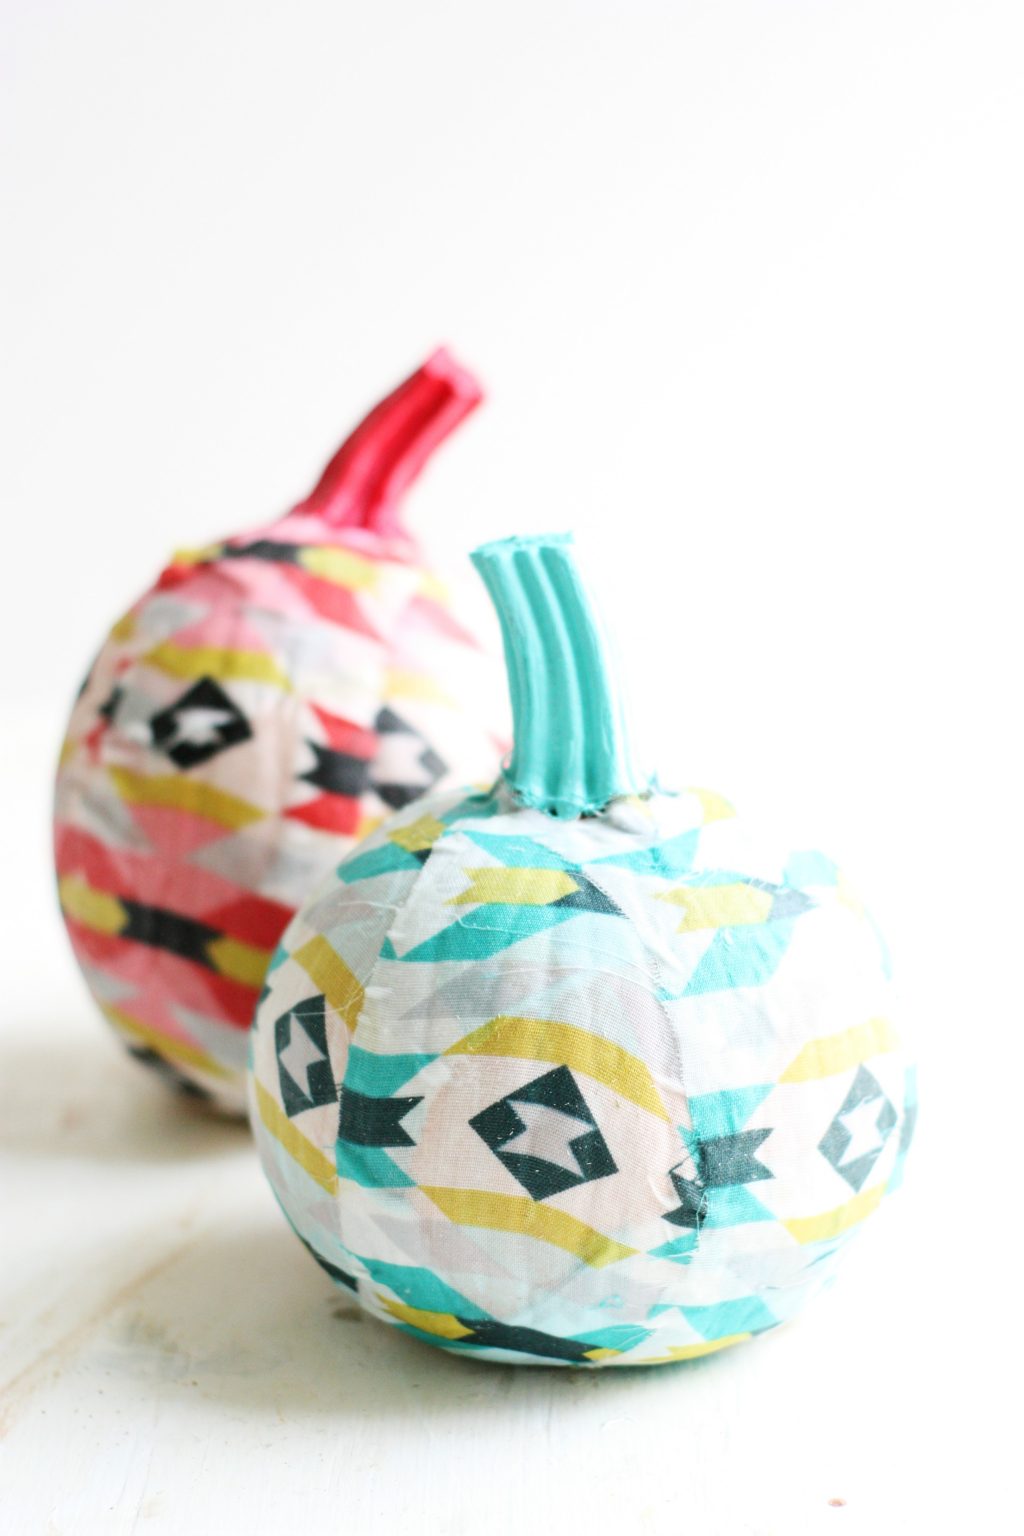 Halloween Crafts: 7 Easy No Carve Pumpkin Ideas + a tutorial featured by Top US Craft Blog + The Pretty Life Girls: Fabric Covered Pumpkins